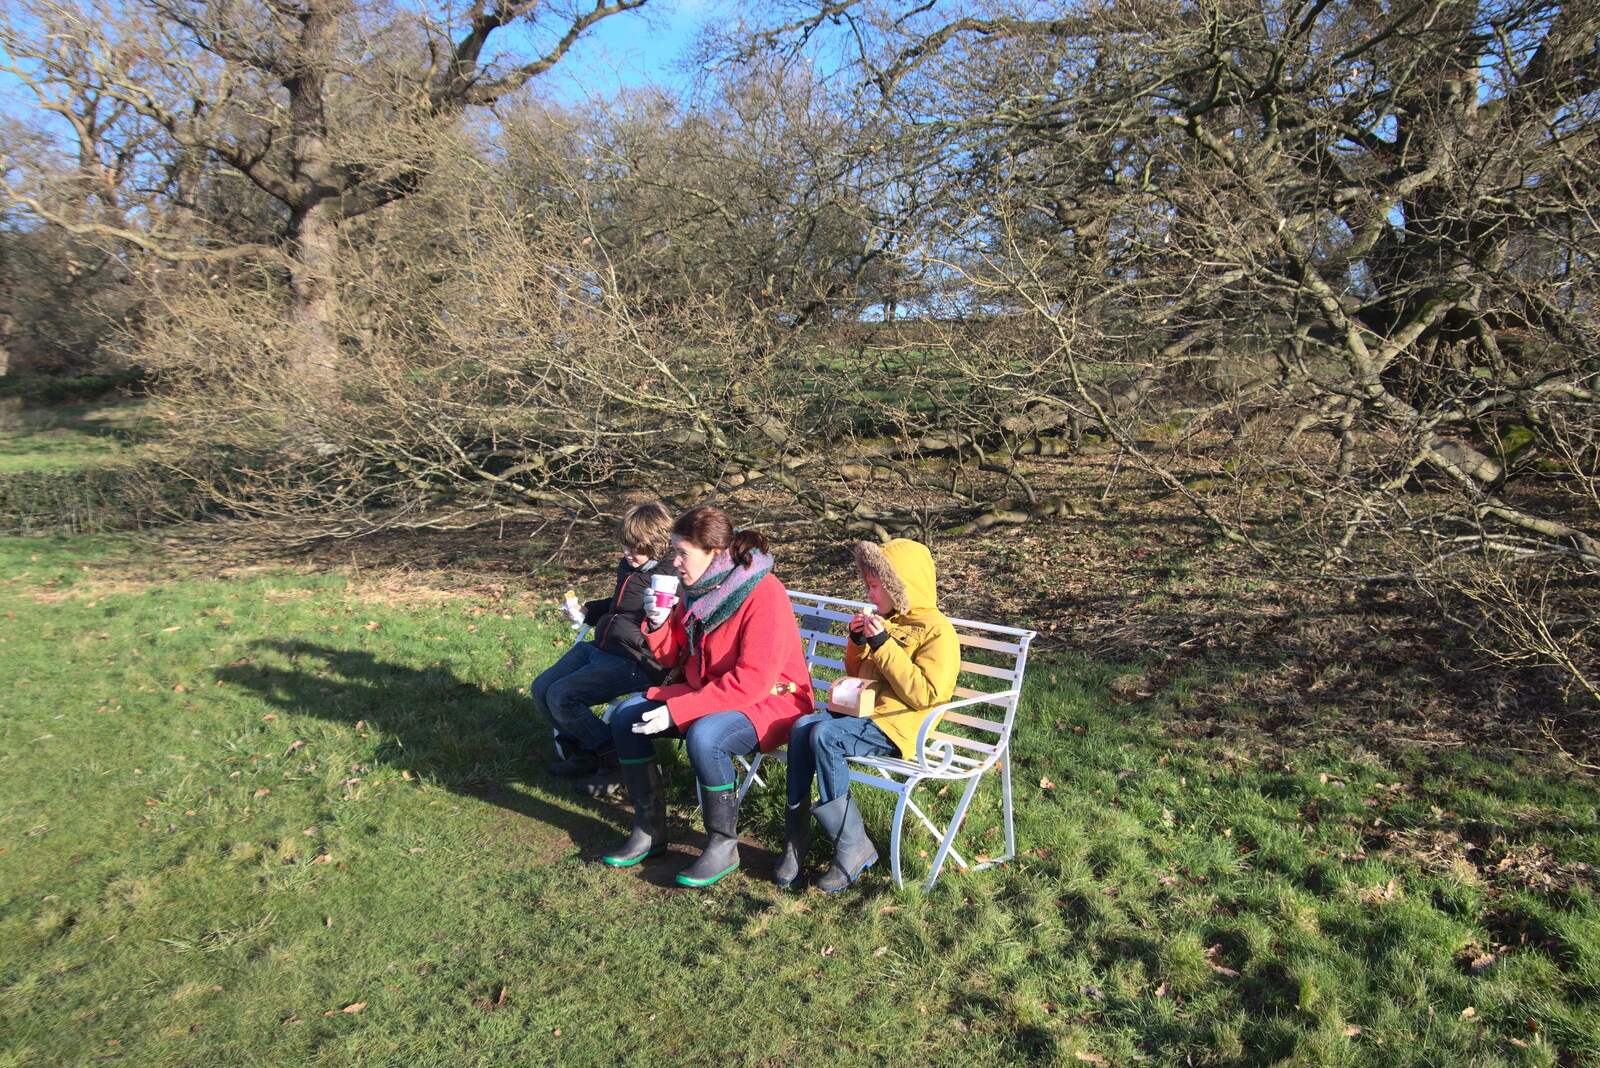 We eat a snack on the bench by the lake from A Visit to Blickling Hall, Aylsham, Norfolk - 9th January 2022